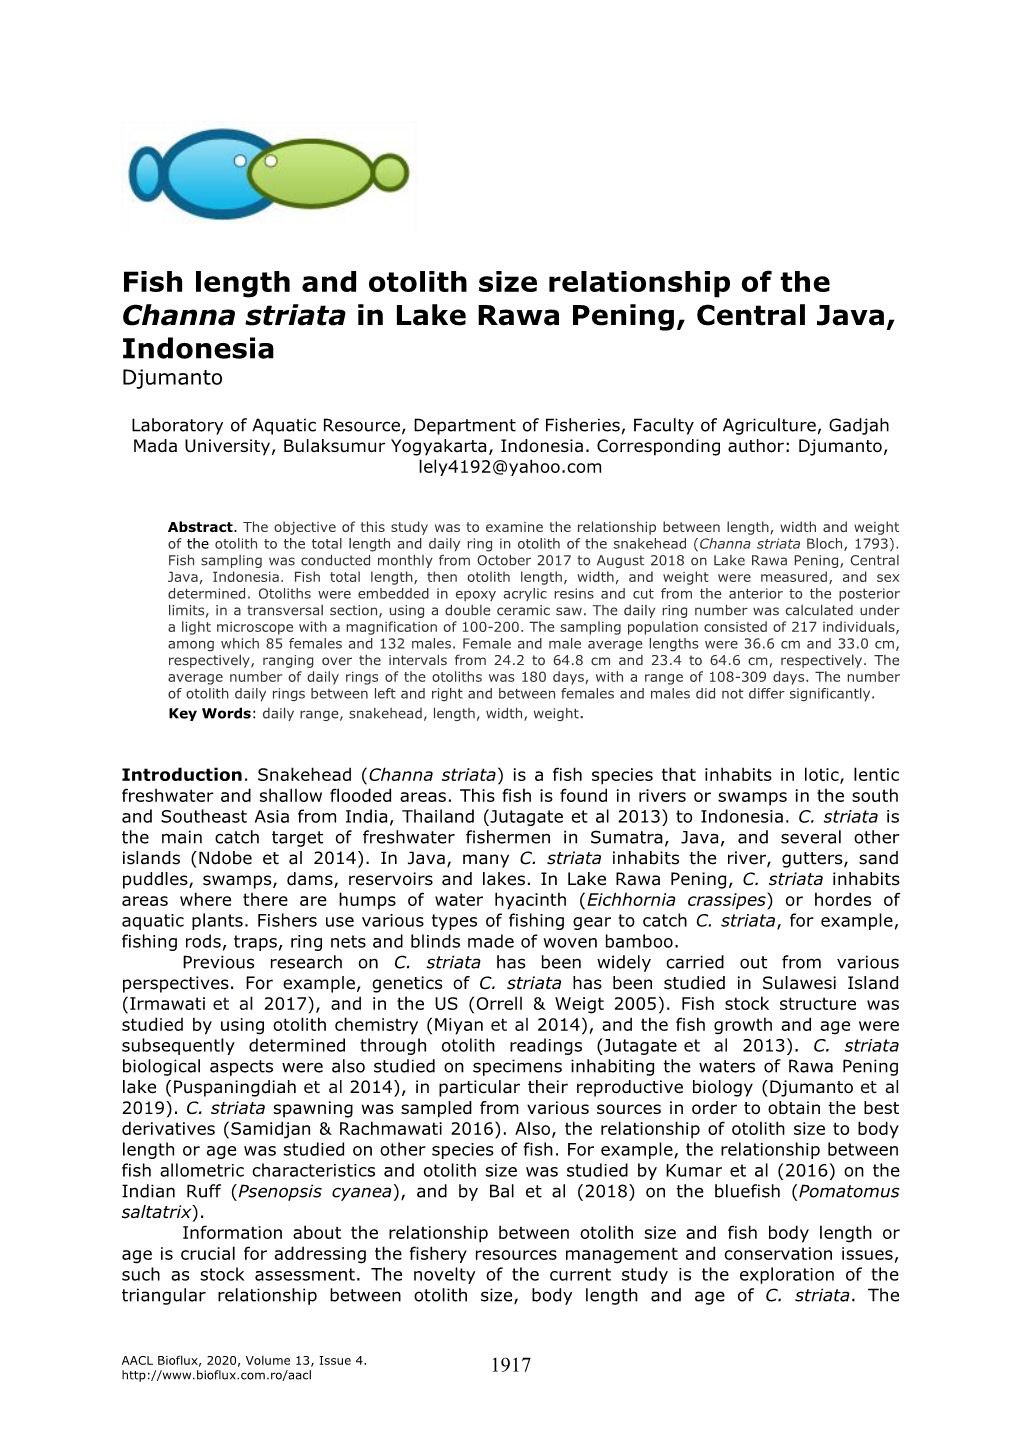 Fish Length and Otolith Size Relationship of the Channa Striata in Lake Rawa Pening, Central Java, Indonesia Djumanto